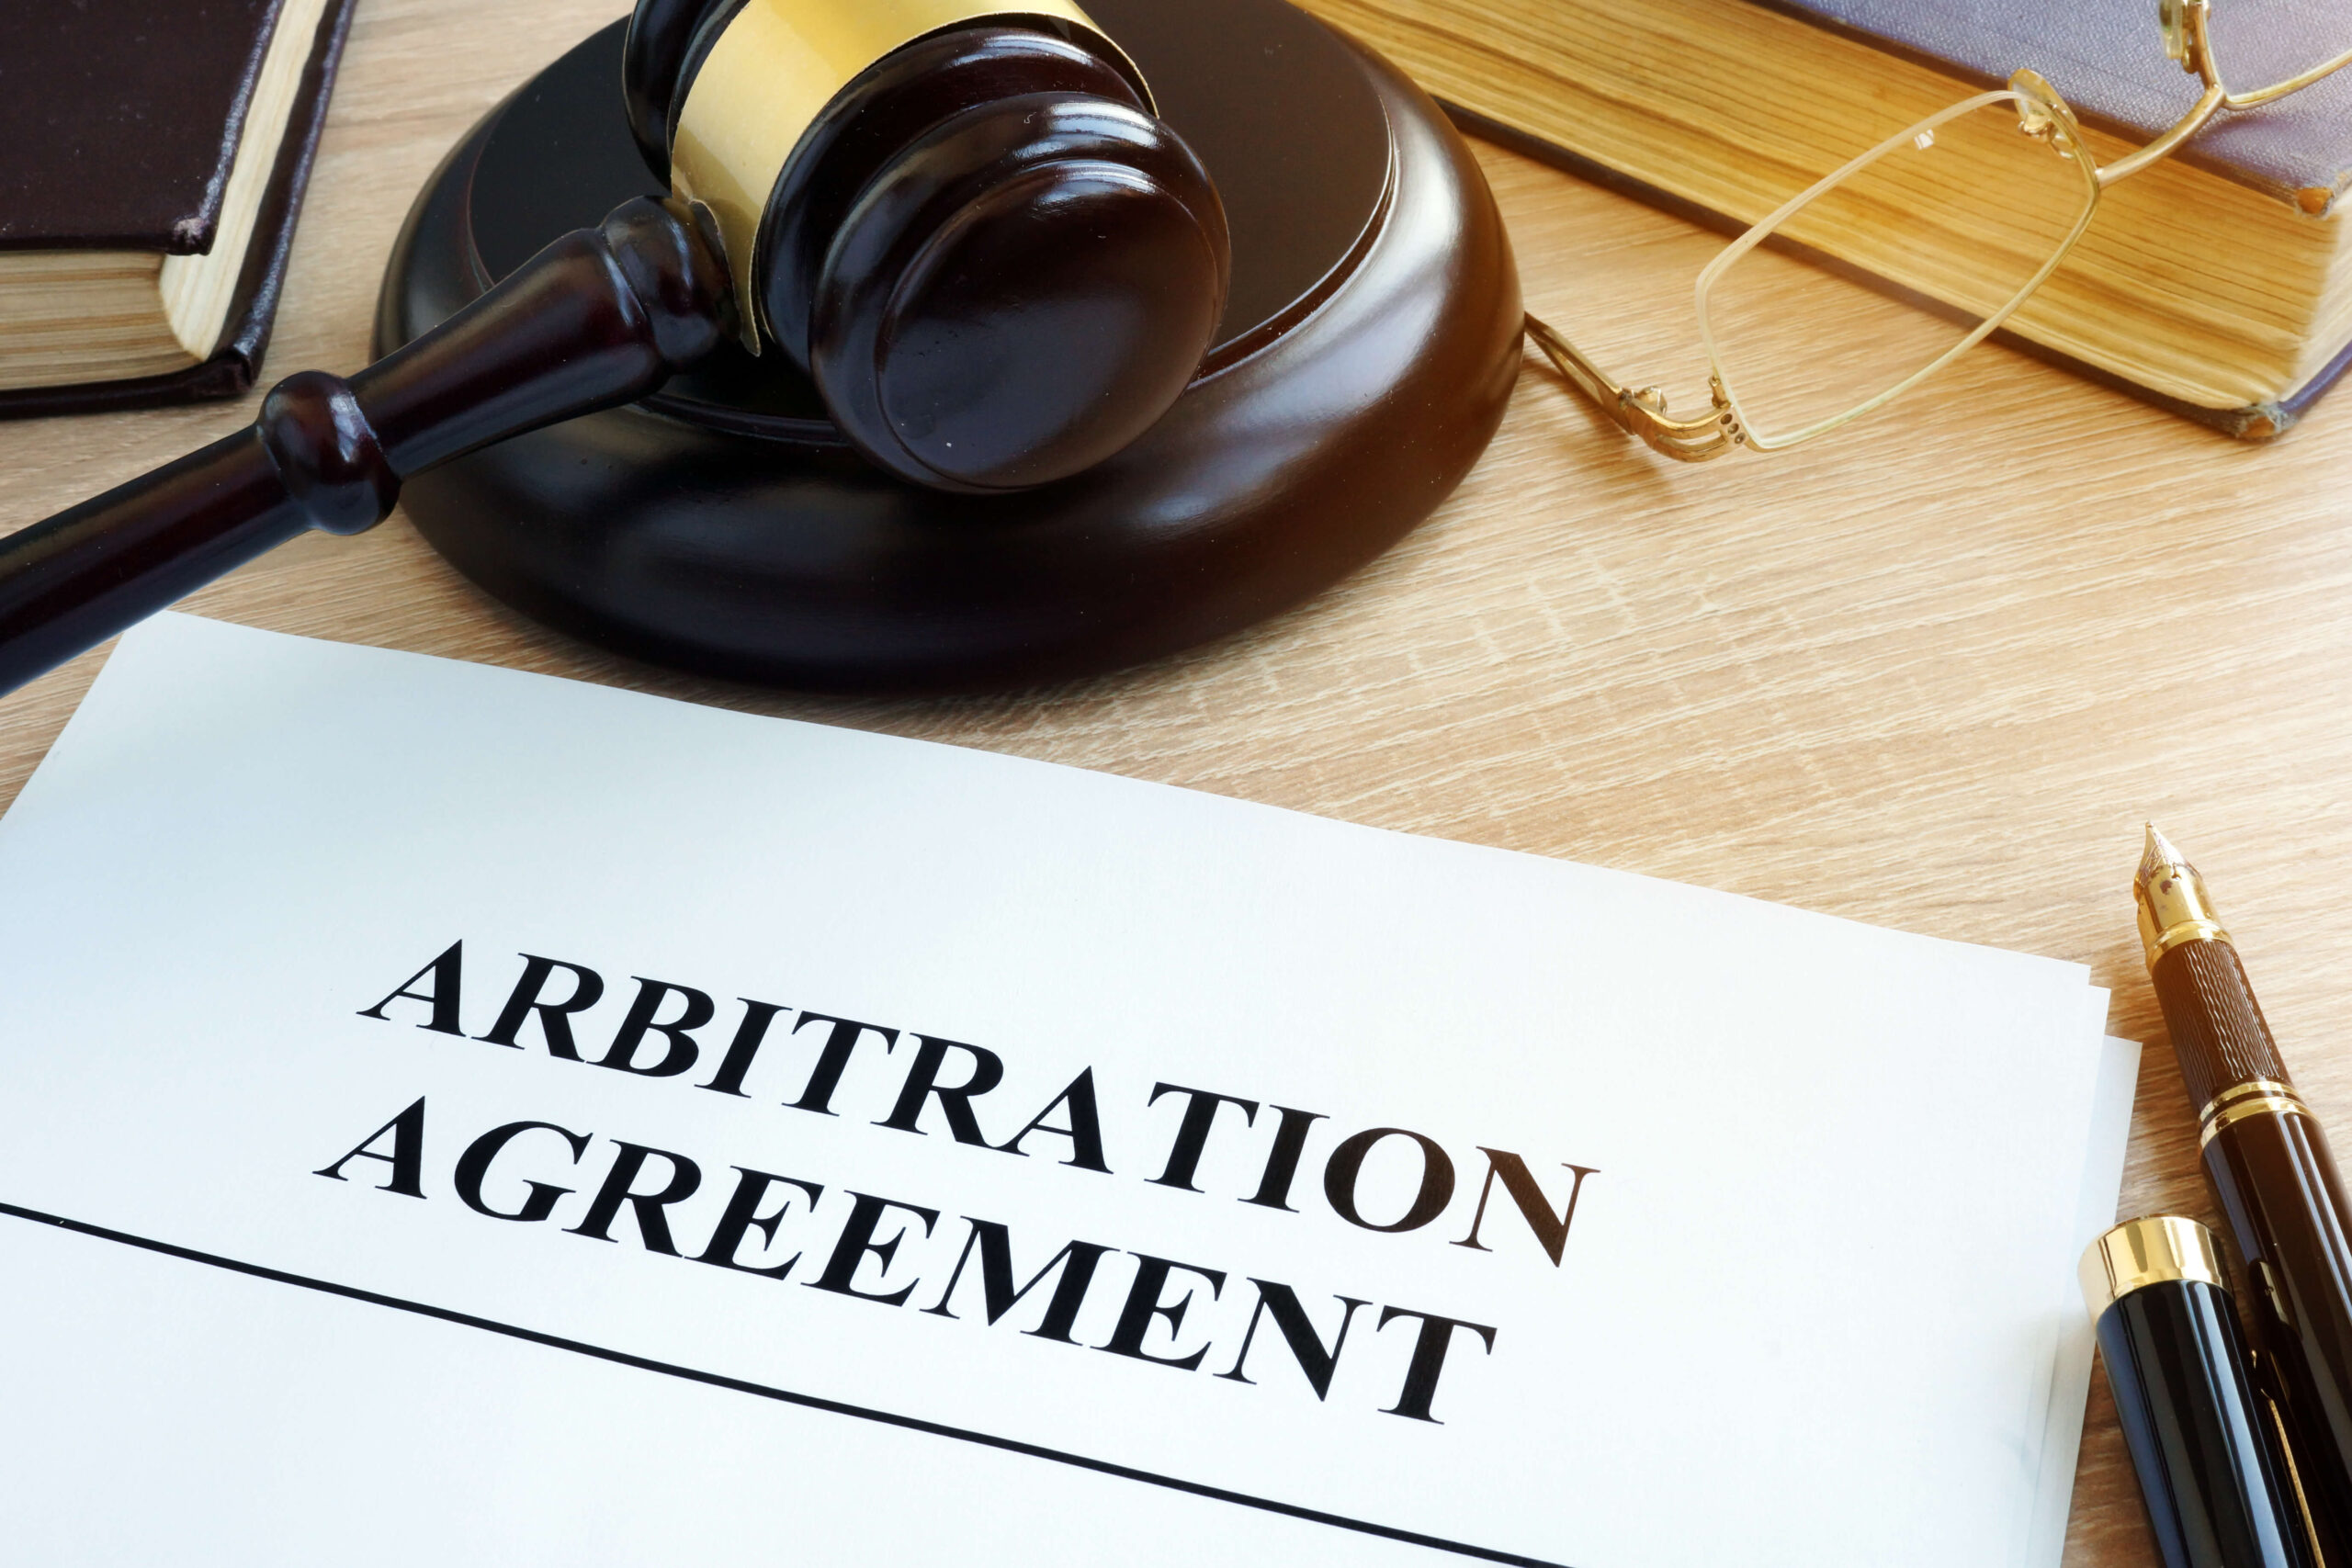 Document with title "Arbitration Agreement."